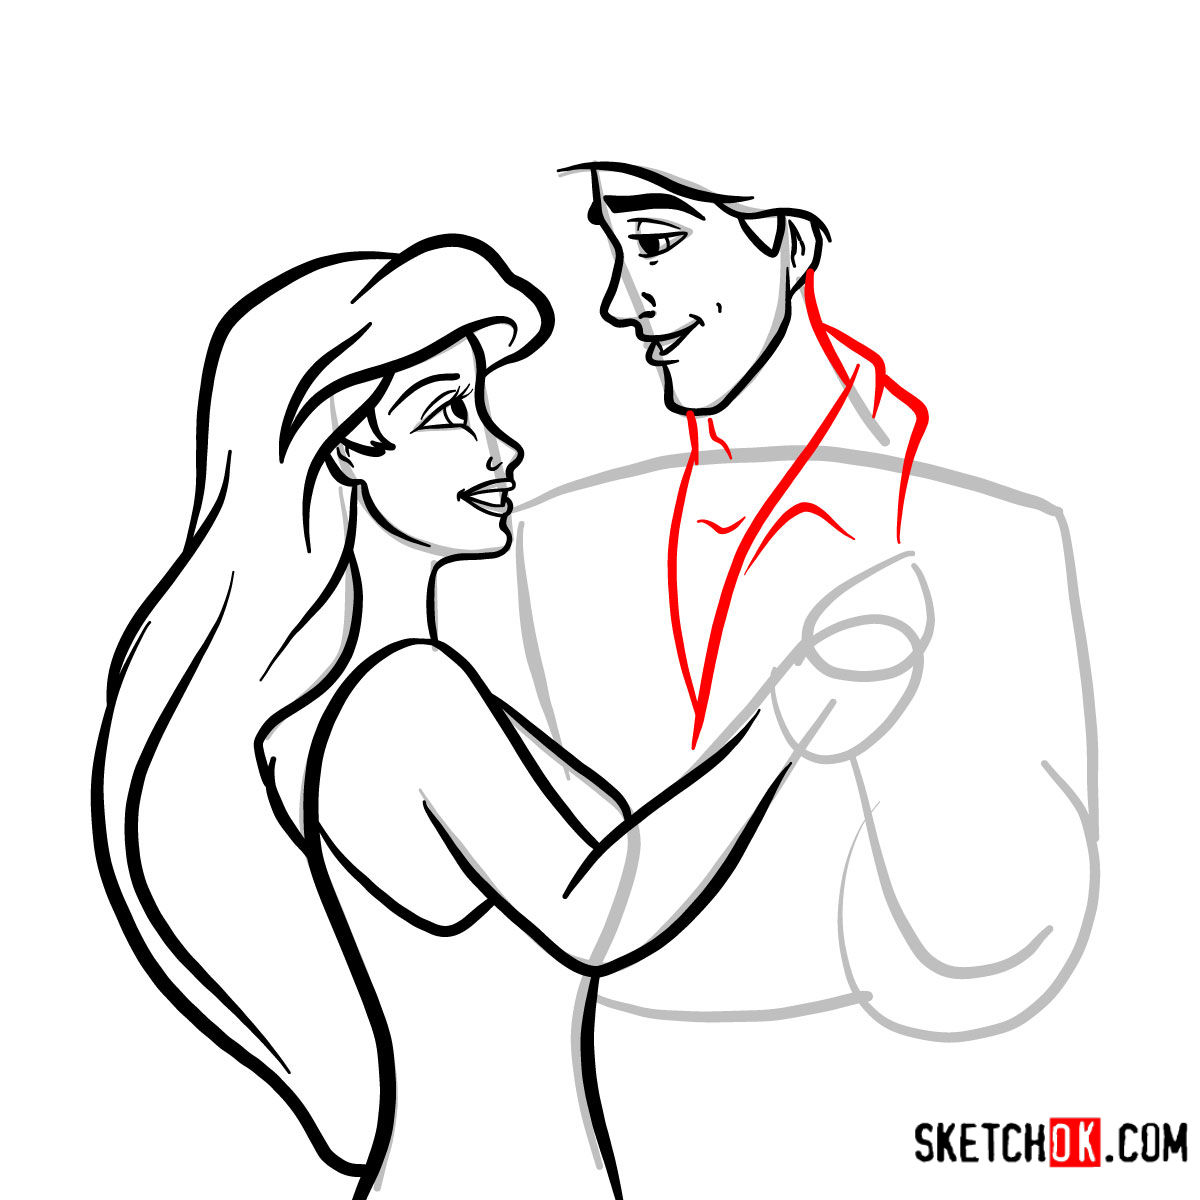 How to draw Eric and Ariel together | The Little Mermaid - step 10